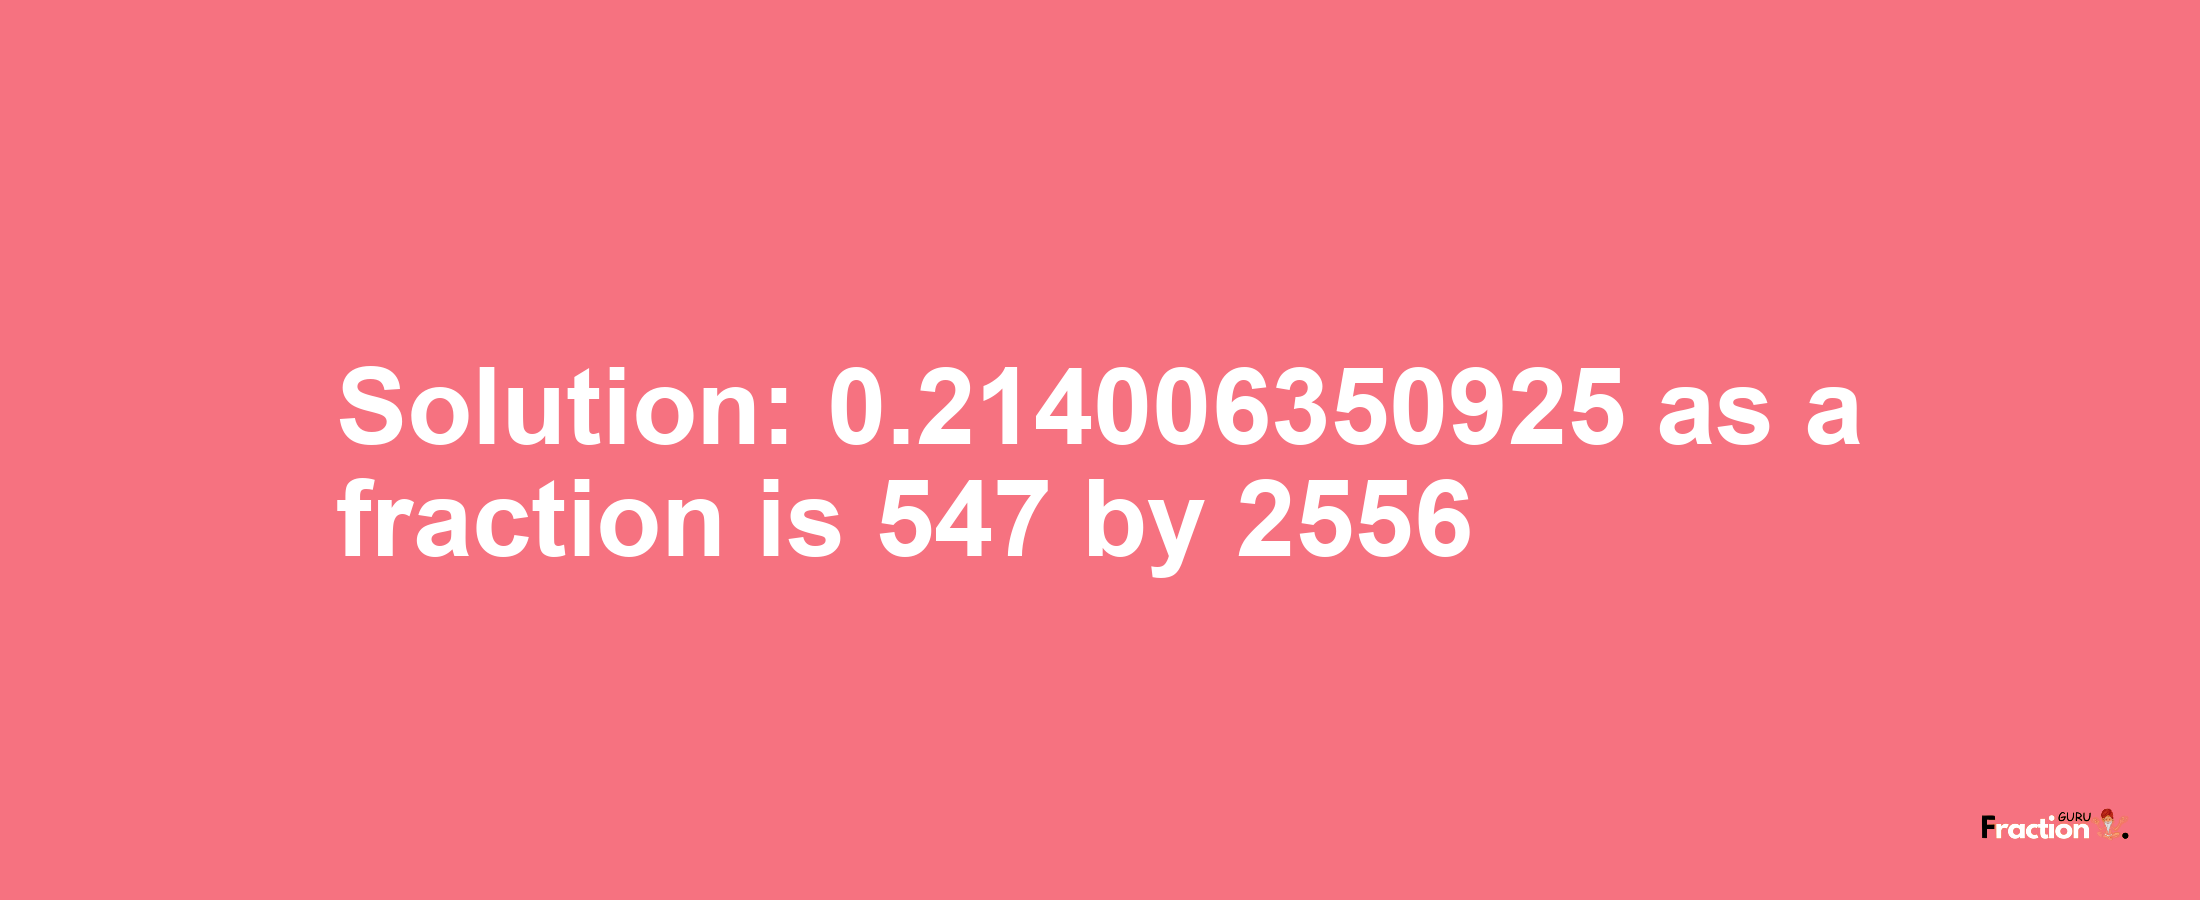 Solution:0.214006350925 as a fraction is 547/2556